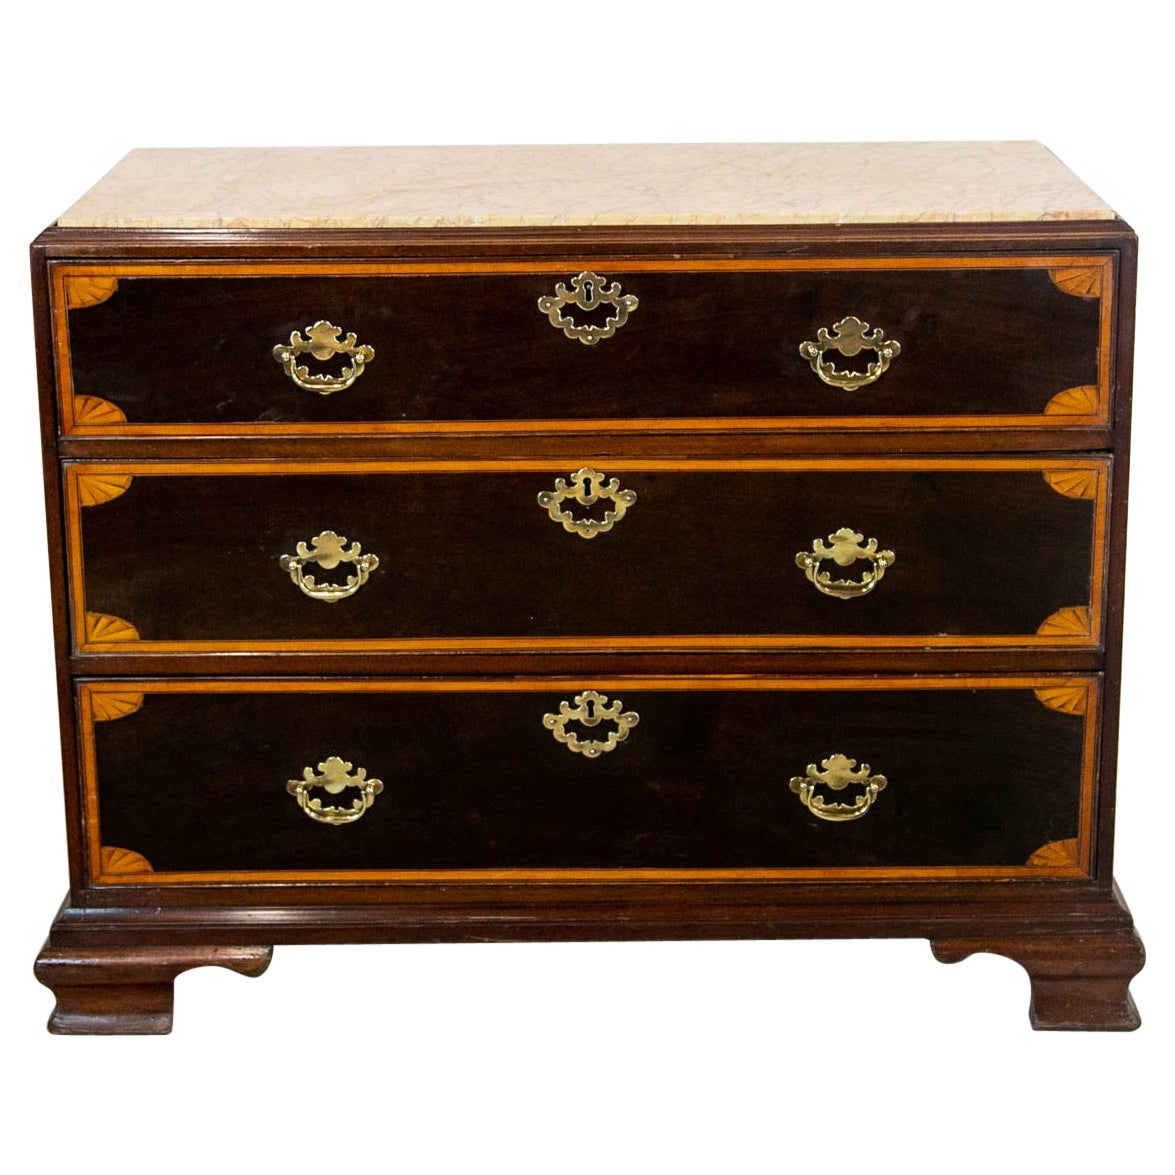 English Marble Top Inlaid Chest